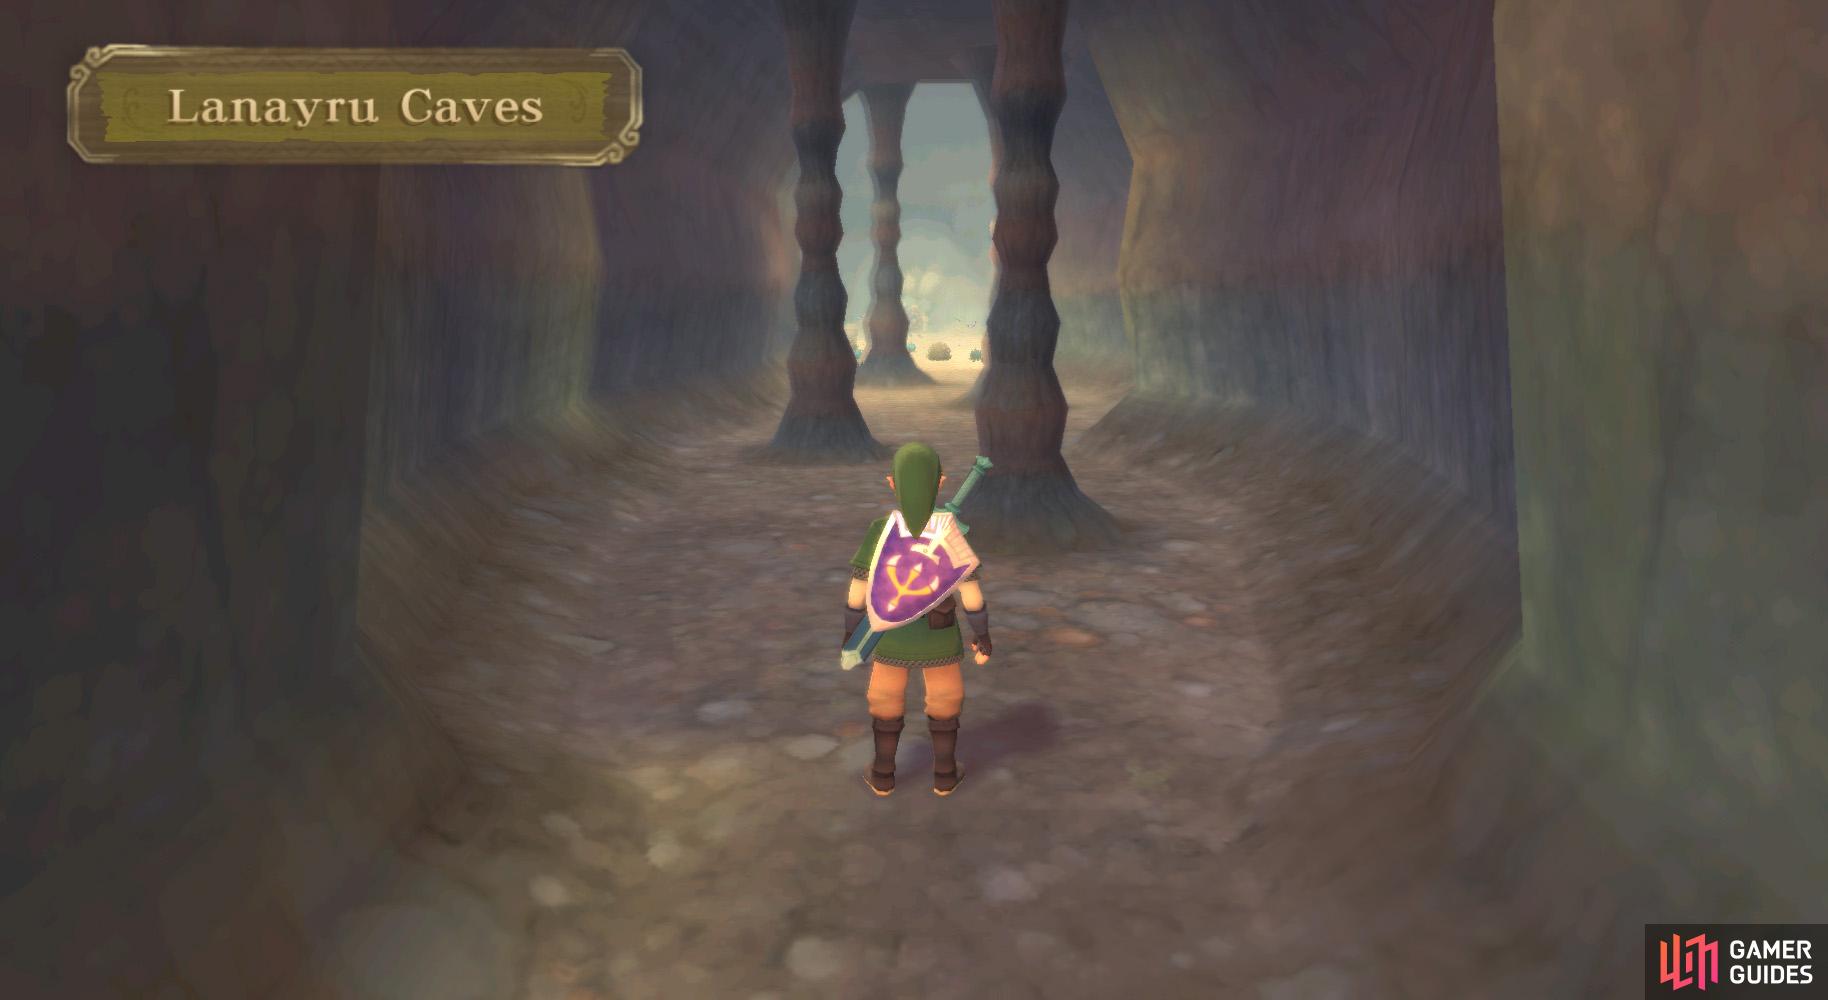 The Lanayru Caves is a tiny area that acts as a crossroads.